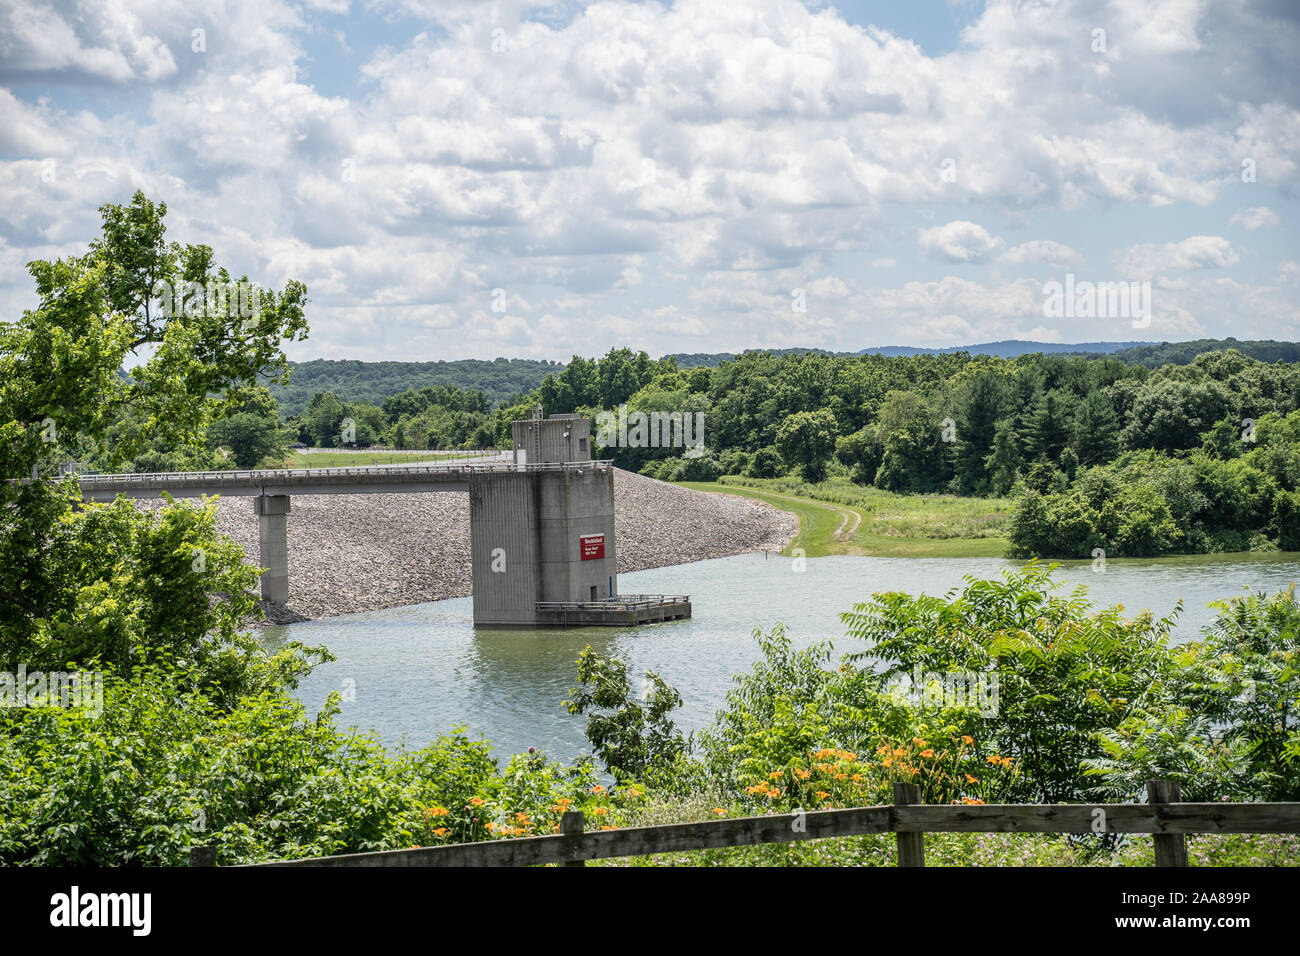 Blue Marsh Dam, June 21, 2019  managed by the U.S. Army Corps of Engineers, is an earth fill dam in Berks County, Pennsylvania, USA Stock Photo